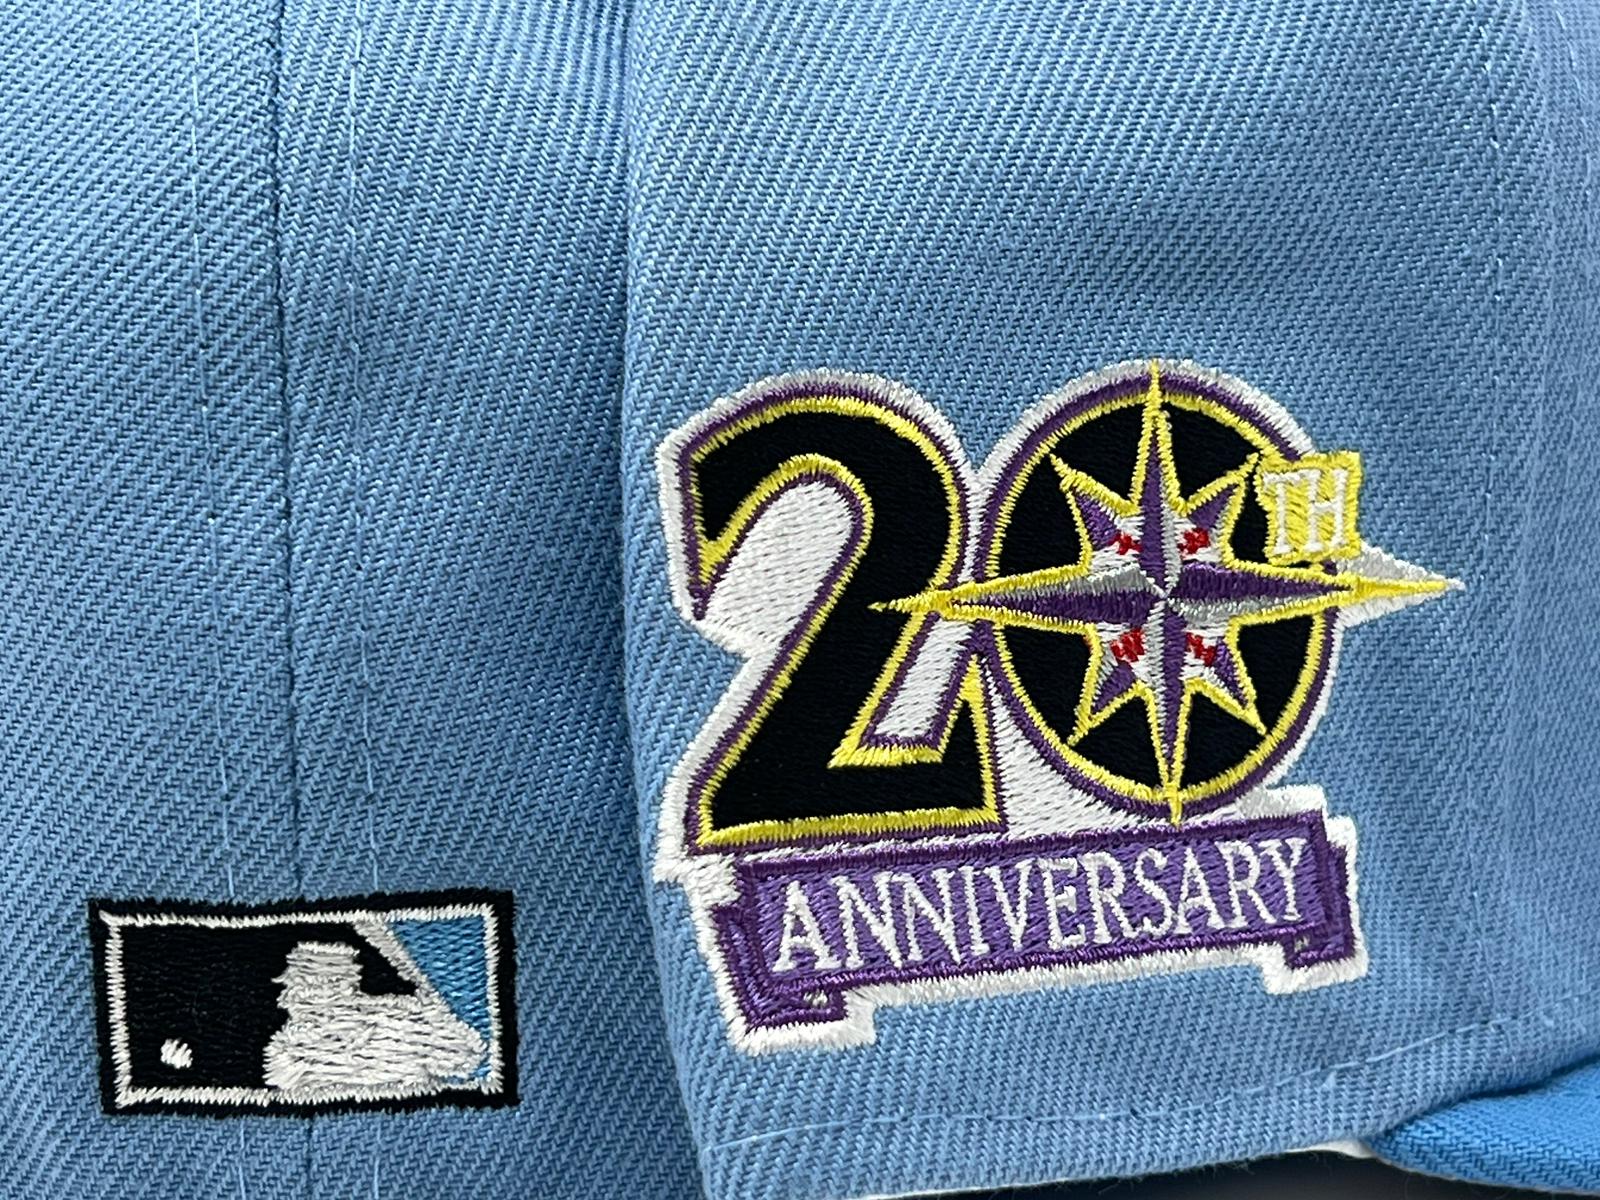 Seattle Mariners 20th Anniversary Iron on Patch 4.75 X 